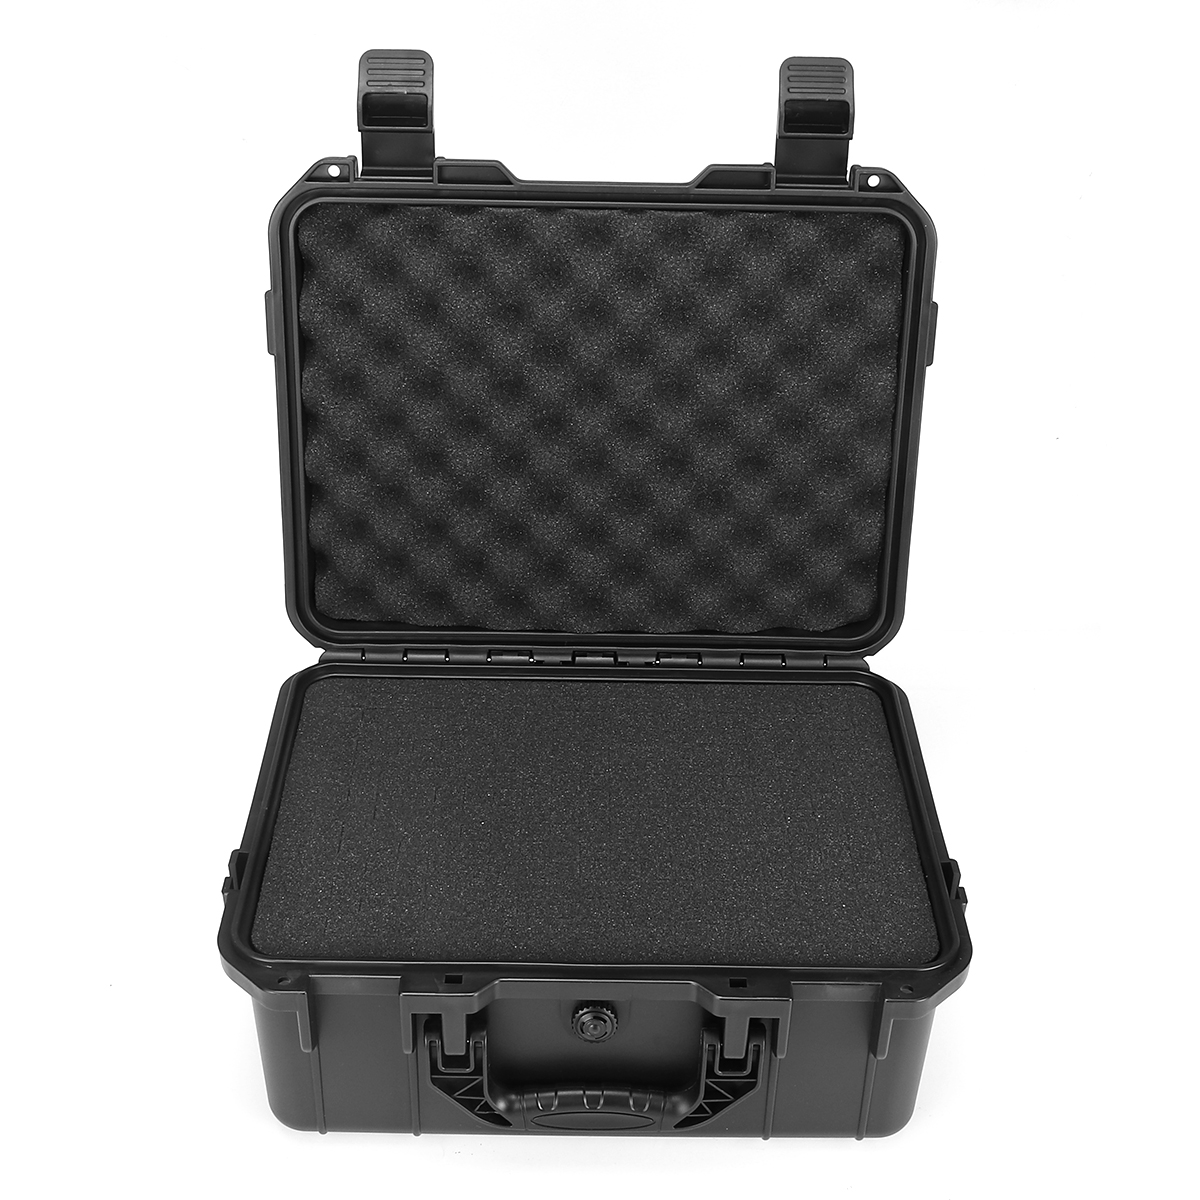 1PC-Shockproof-Sealed-Safety-Case-Toolbox-Airtight-Waterproof-Tool-Box-Instrument-Case-Dry-Box-with--1915433-11